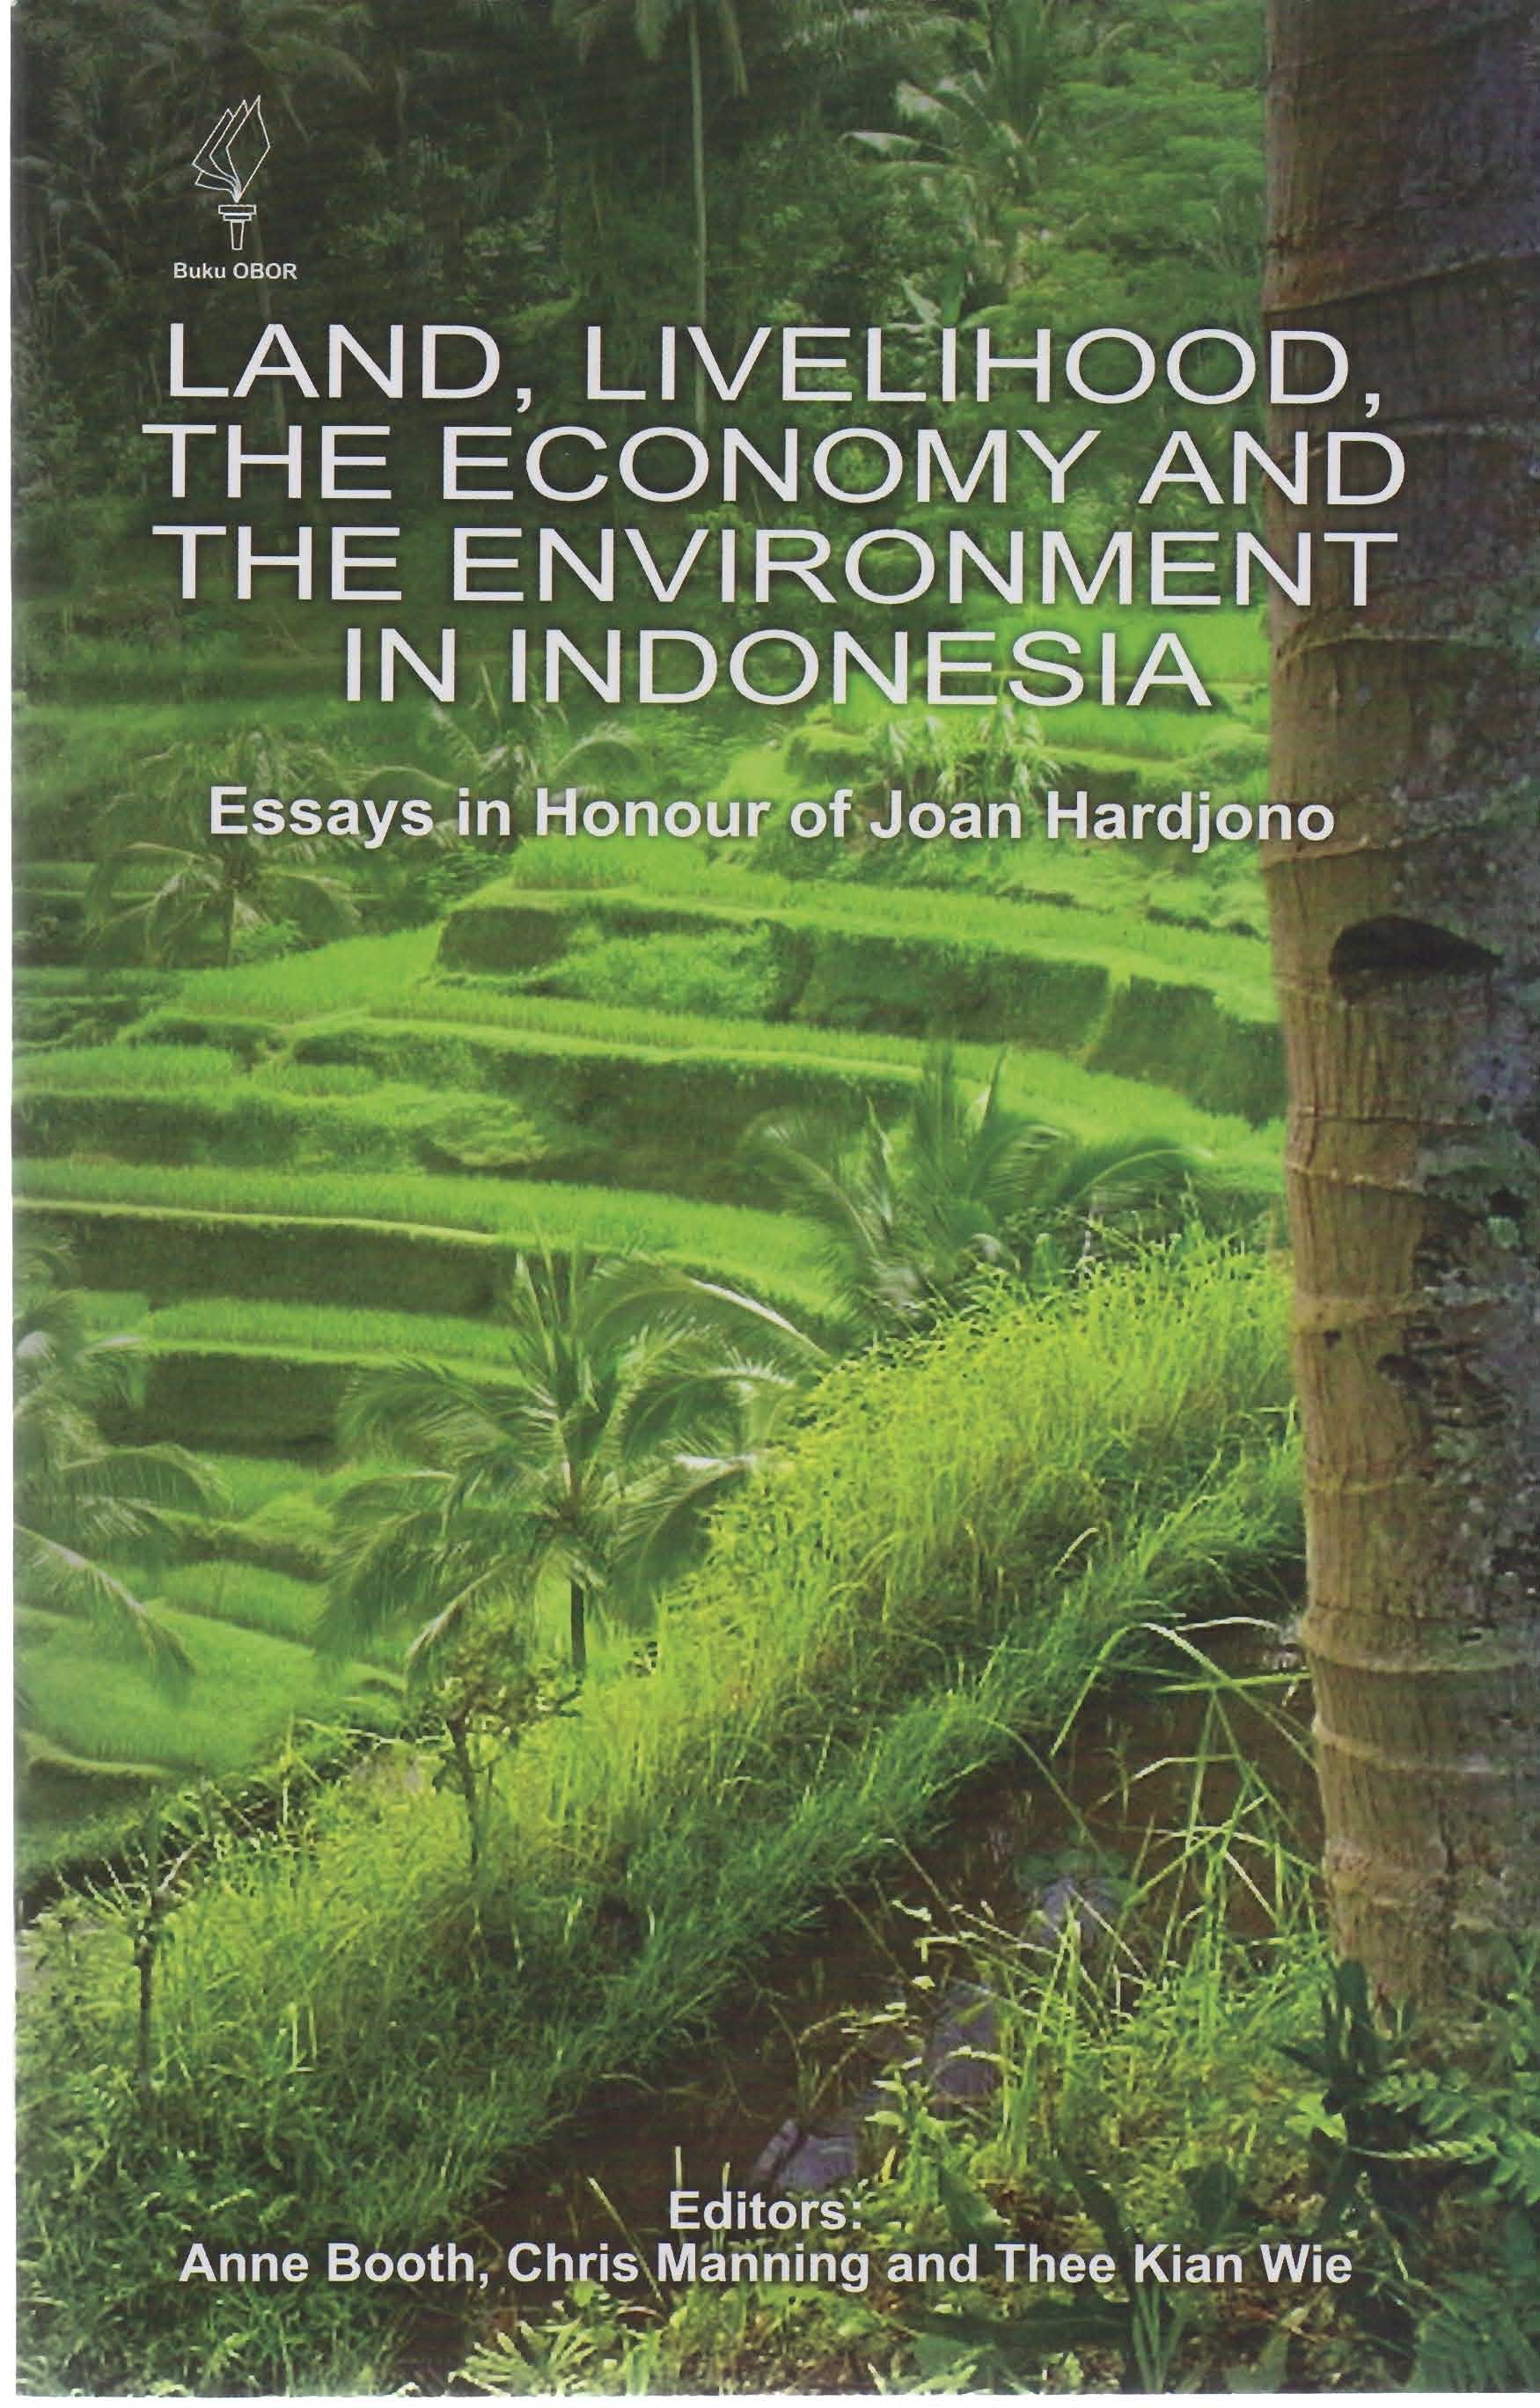 Land, livelihood, the economy and the environtment in Indonesia :  essays in honour of Joan Hardjono